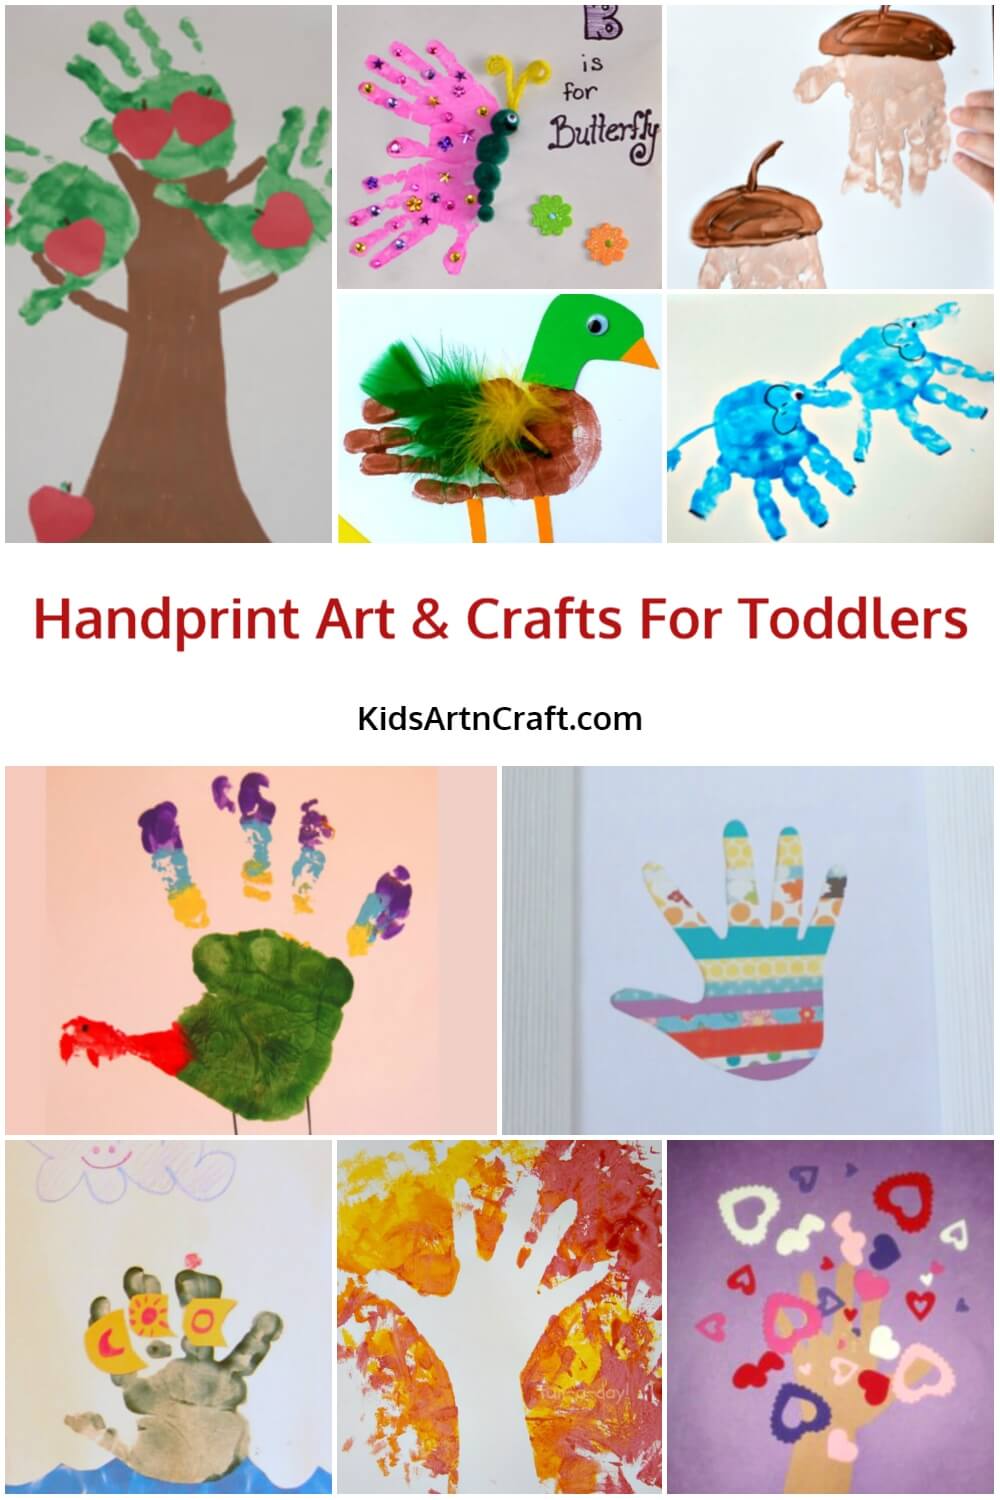 Handprint Art & Crafts For Toddlers